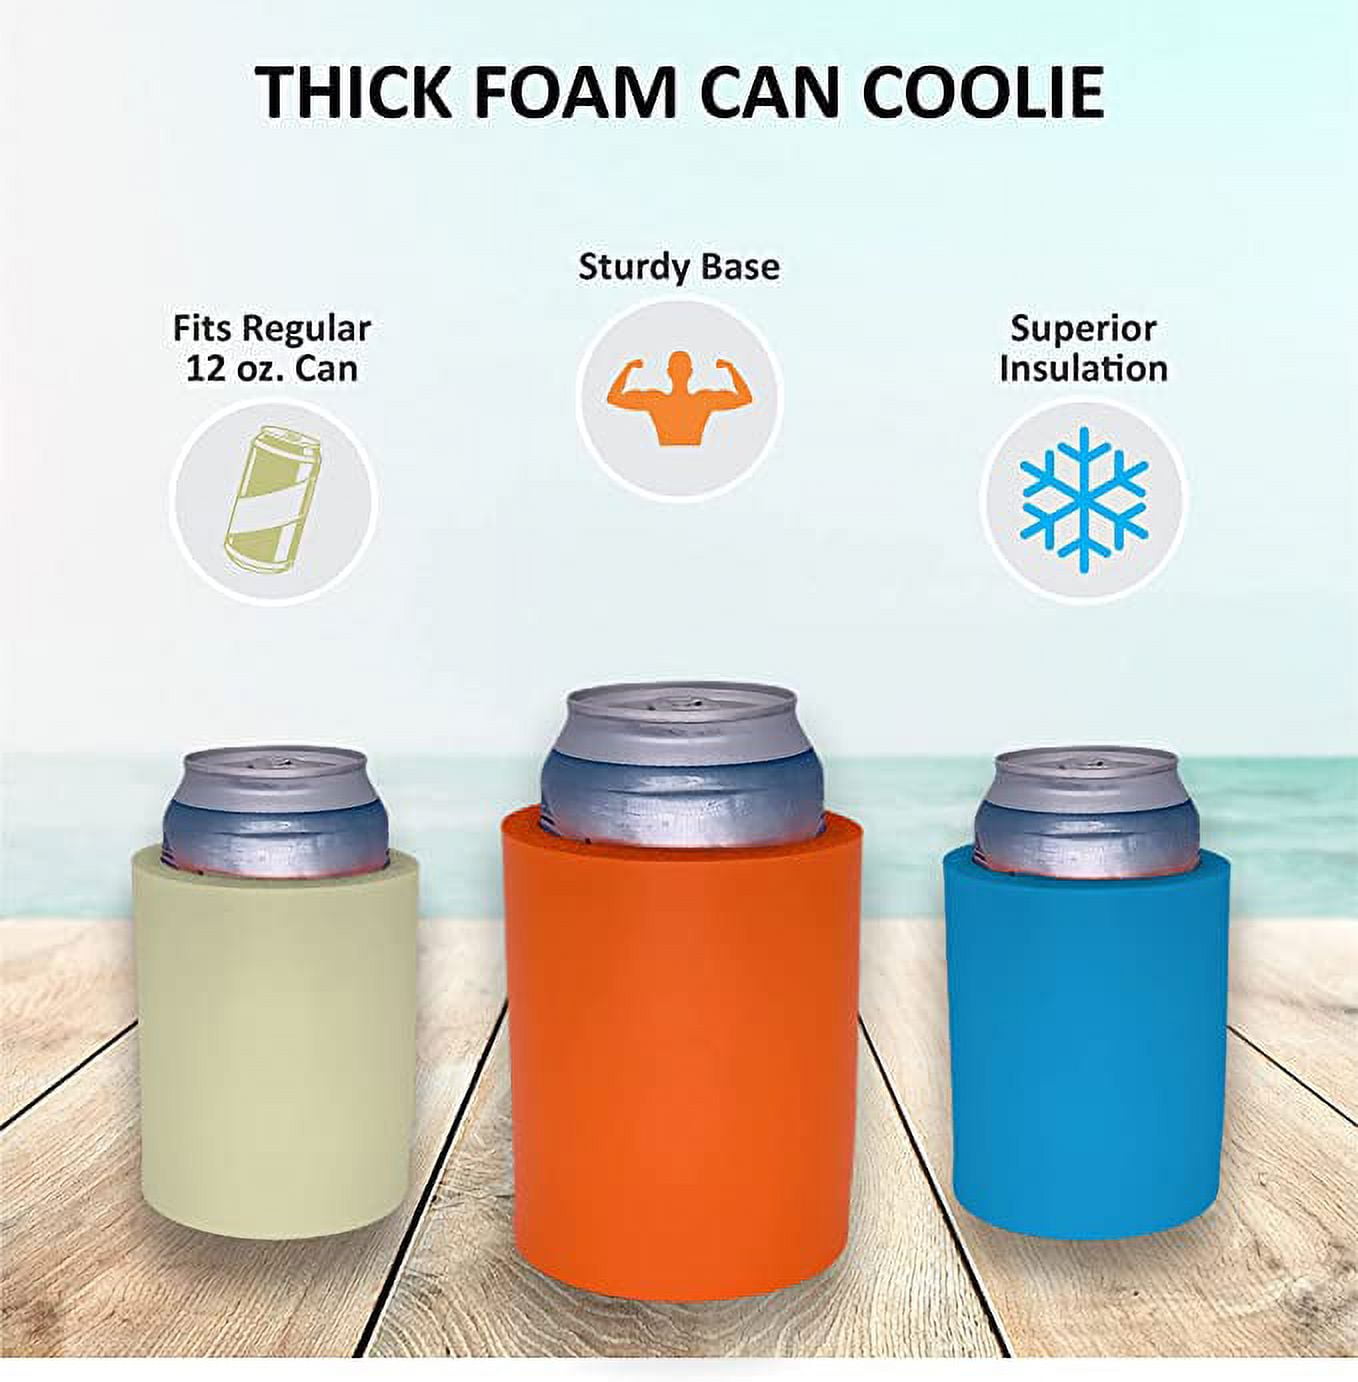 Insulated Foam Cooler 12 x 12 x 12 1/4 - 1 1/2 Thick